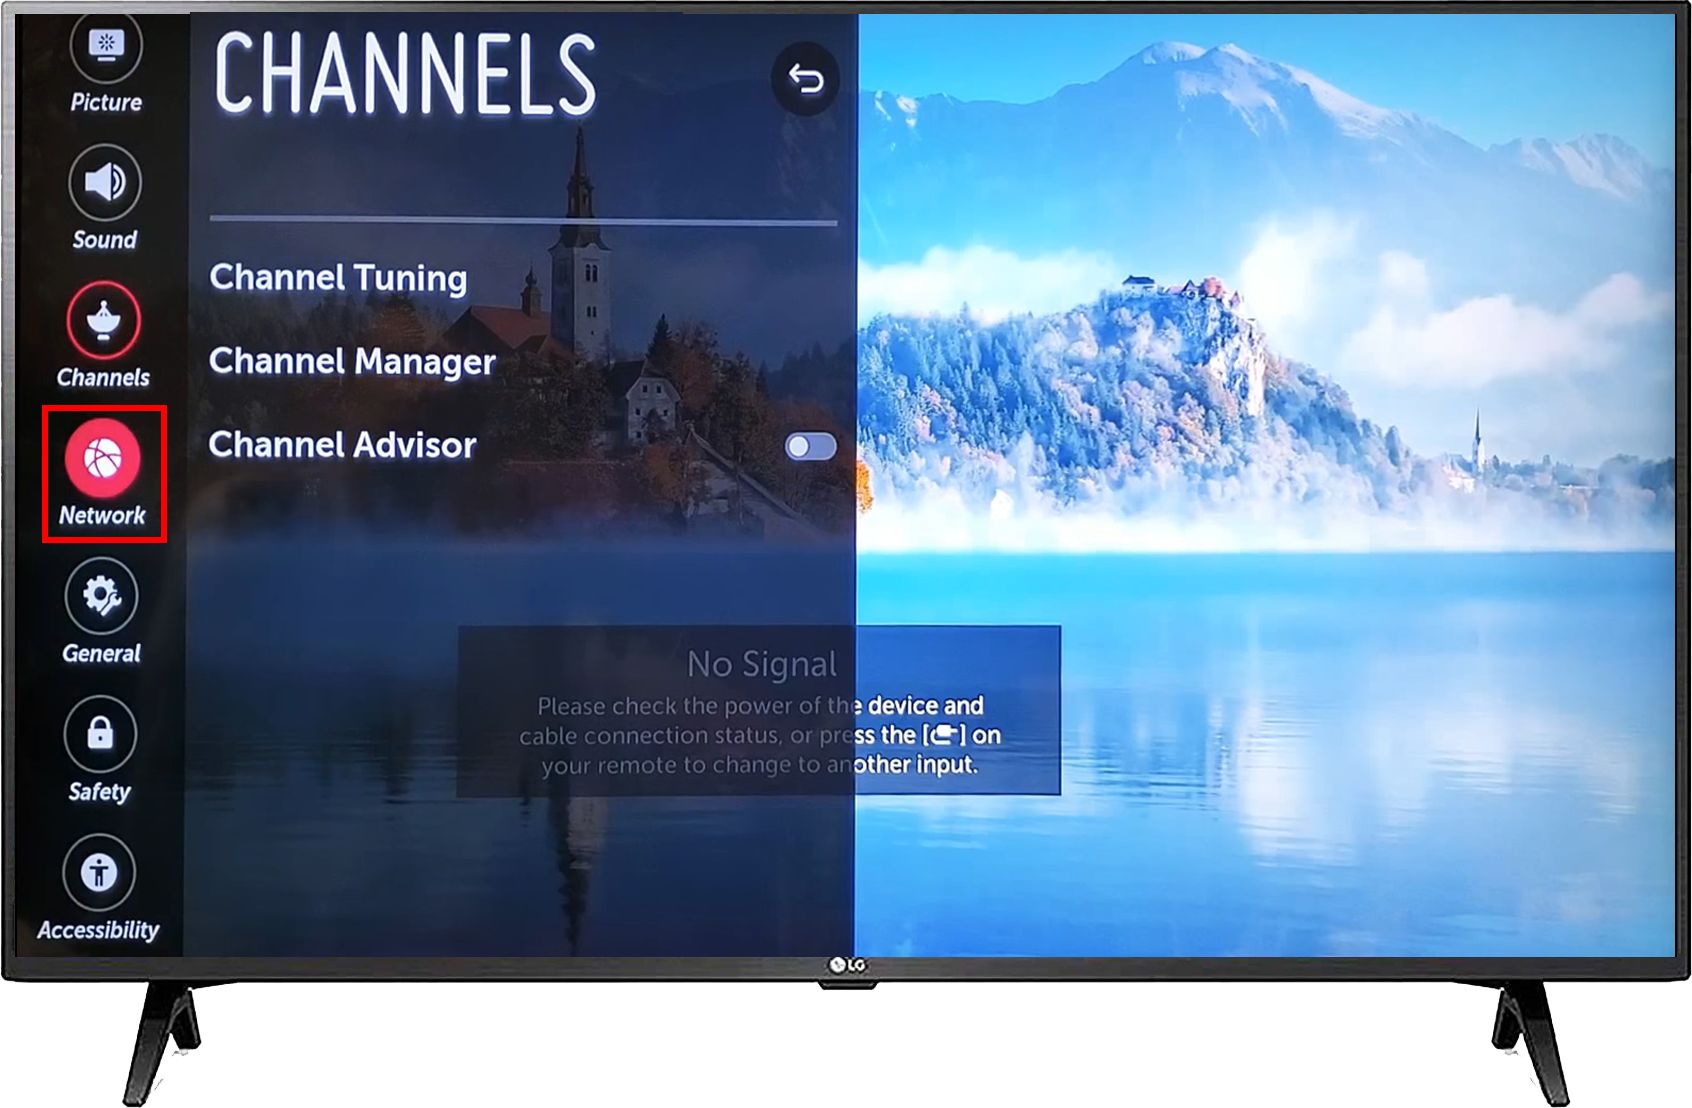 How To Connect Cable To LG Smart TV